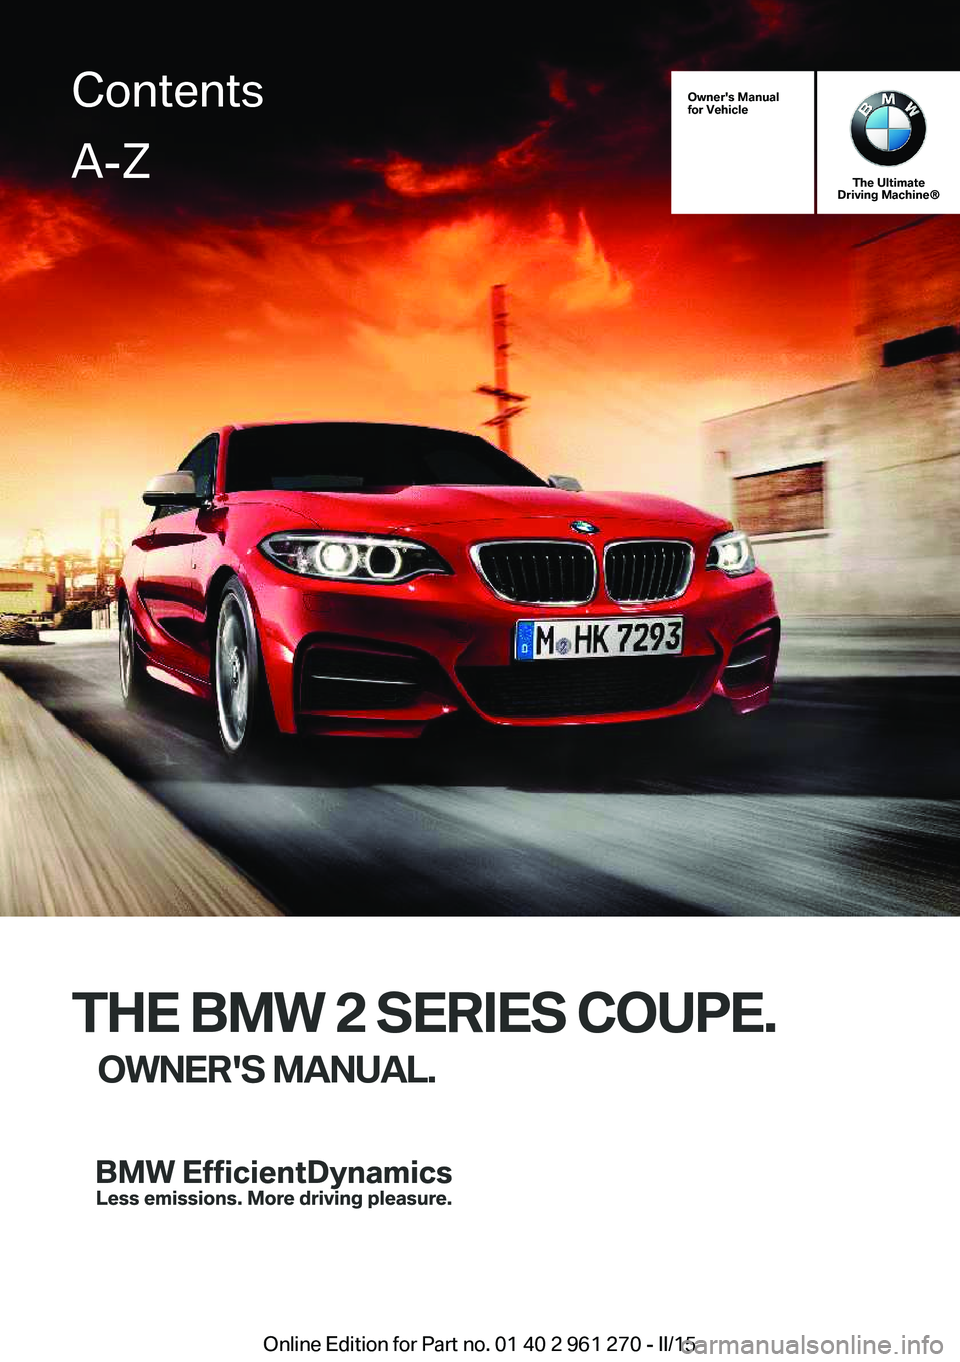 BMW M235I COUPE 2015  Owners Manual Owner's Manual
for Vehicle
The Ultimate
Driving Machine®
THE BMW 2 SERIES COUPE.
OWNER'S MANUAL.
ContentsA-Z
Online Edition for Part no. 01 40 2 961 270 - II/15   